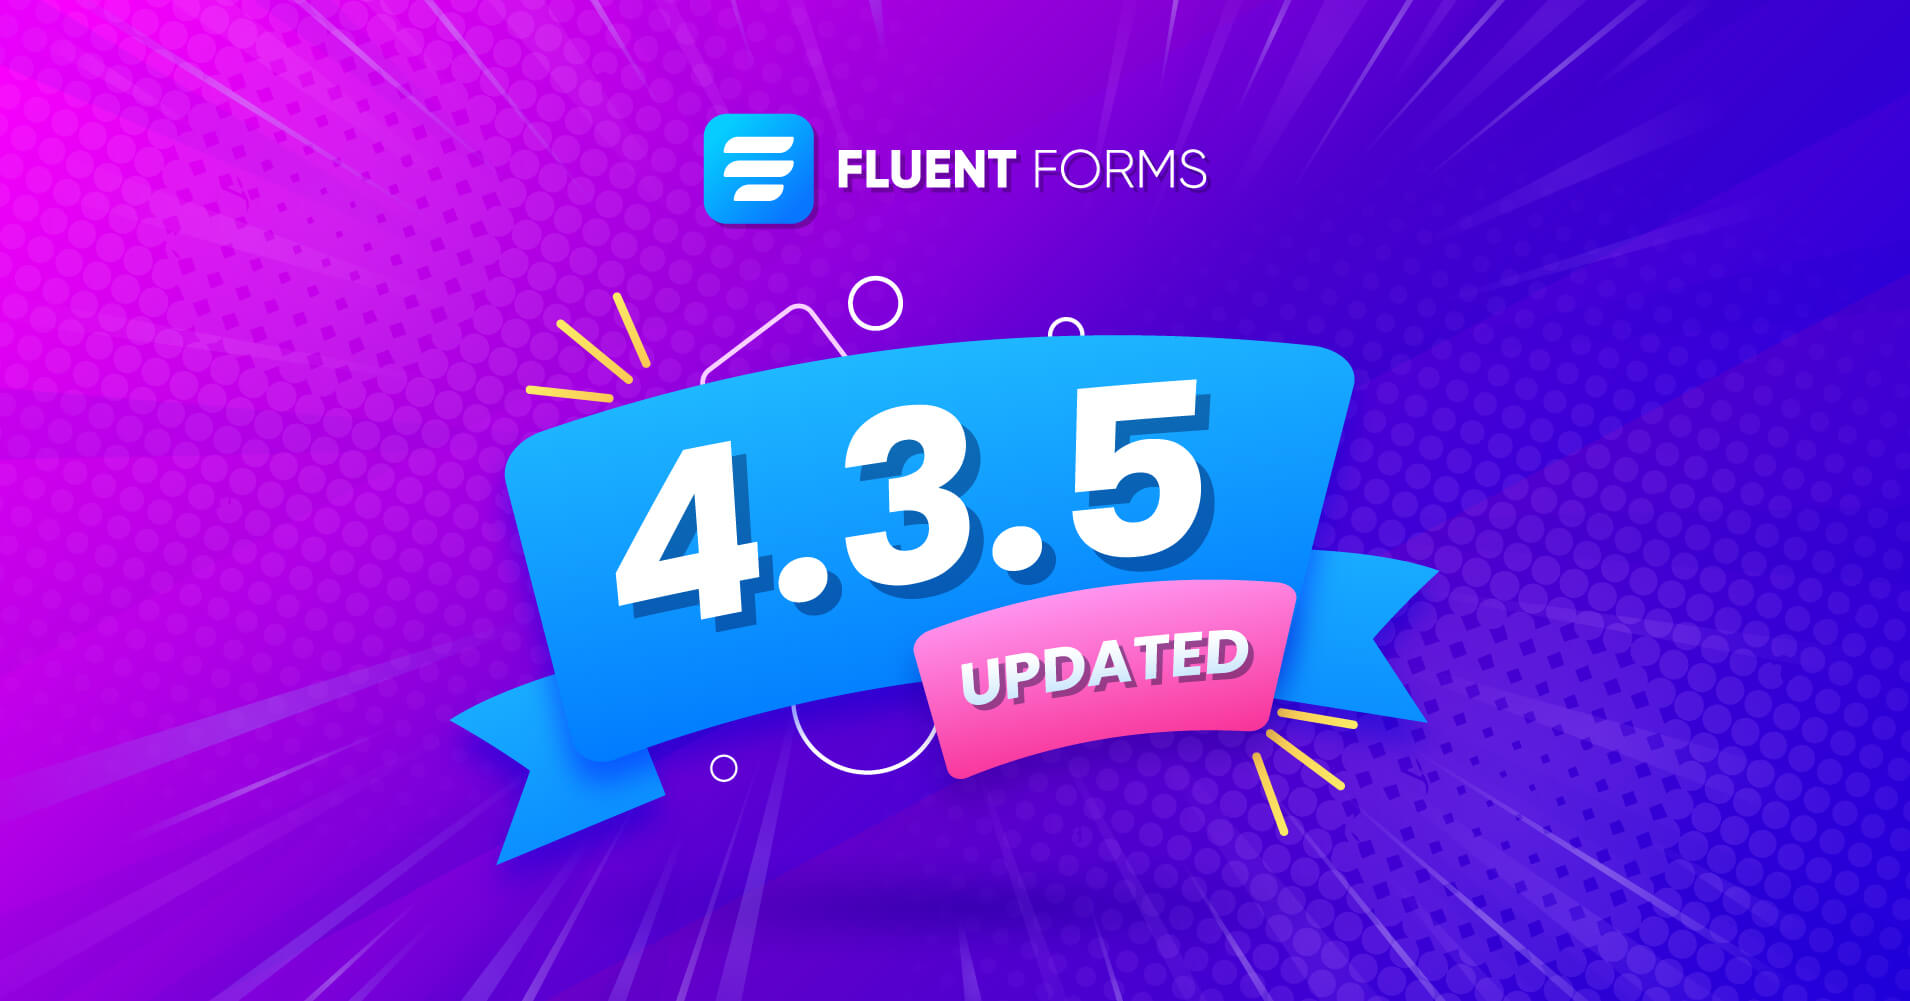 Fluent Forms 4.3.5 release note